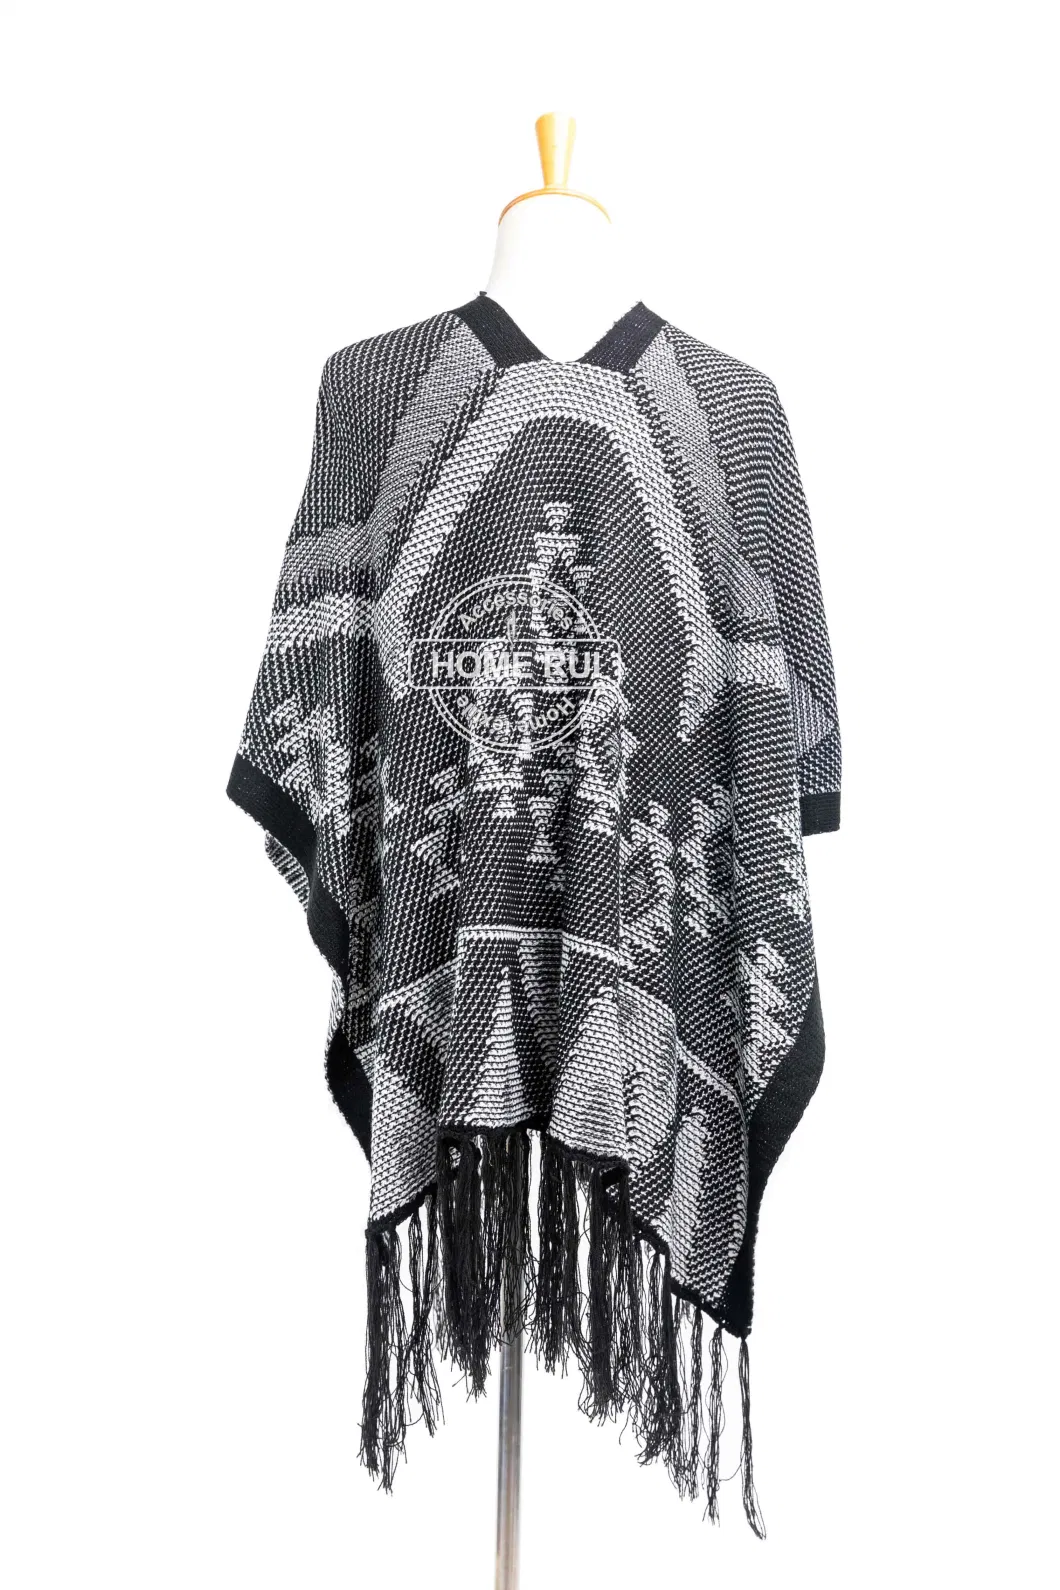 Home Rui Manufacturer Outerwear Spring Autumn Woman Warmth Reversible Rhombus Apparel Accessory Fringe Oversize Aztec Thick Cardigan Shawl Cape Cloak